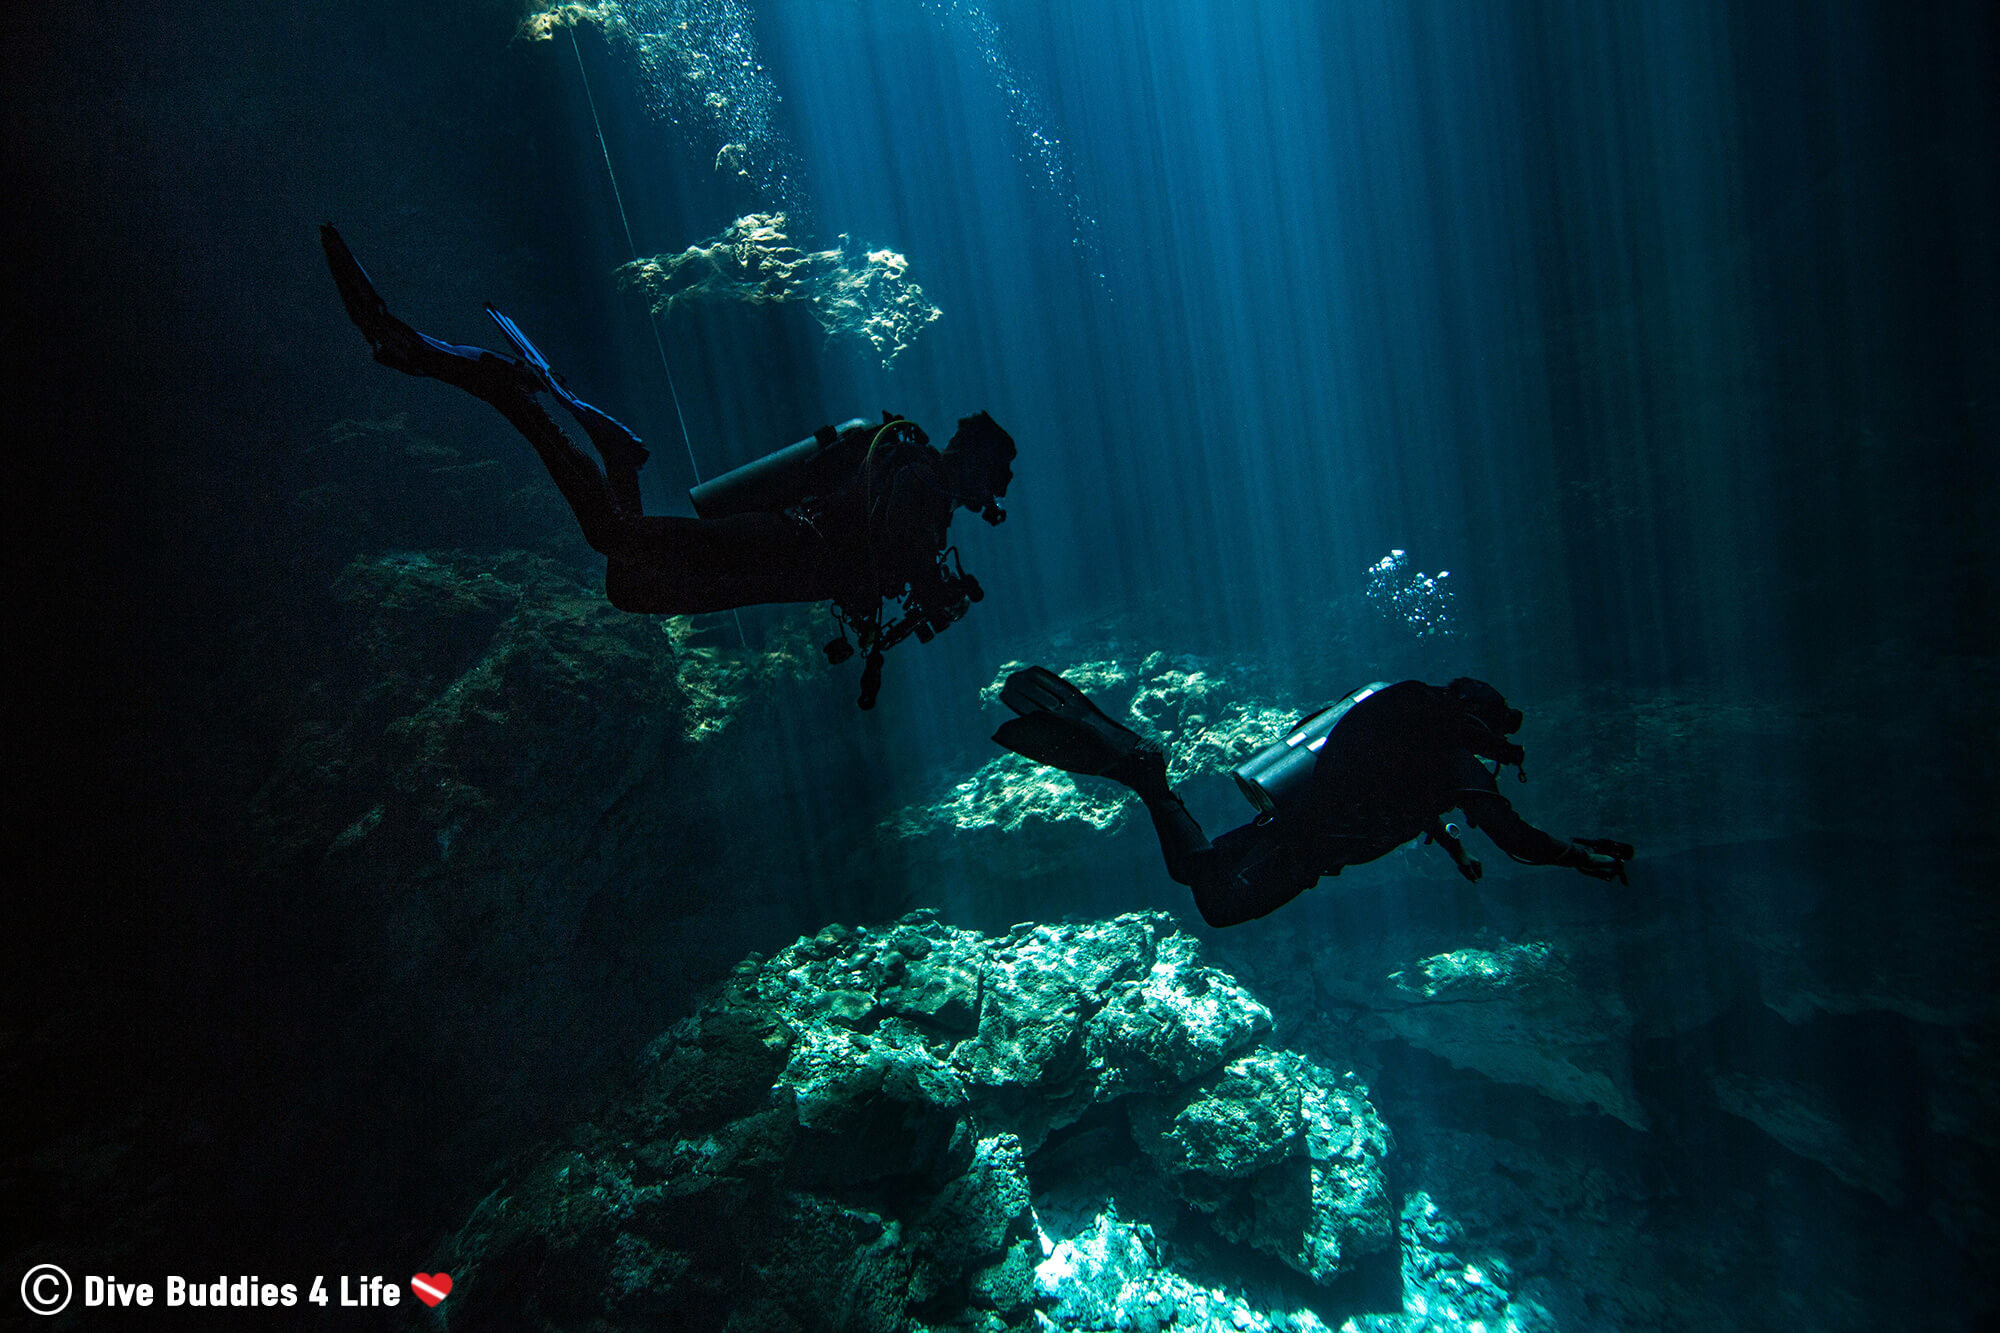 The Silhouette Of Two Scuba Divers Descending Into The Underwater Cenotes Called The Pit In Tulum, Mexico